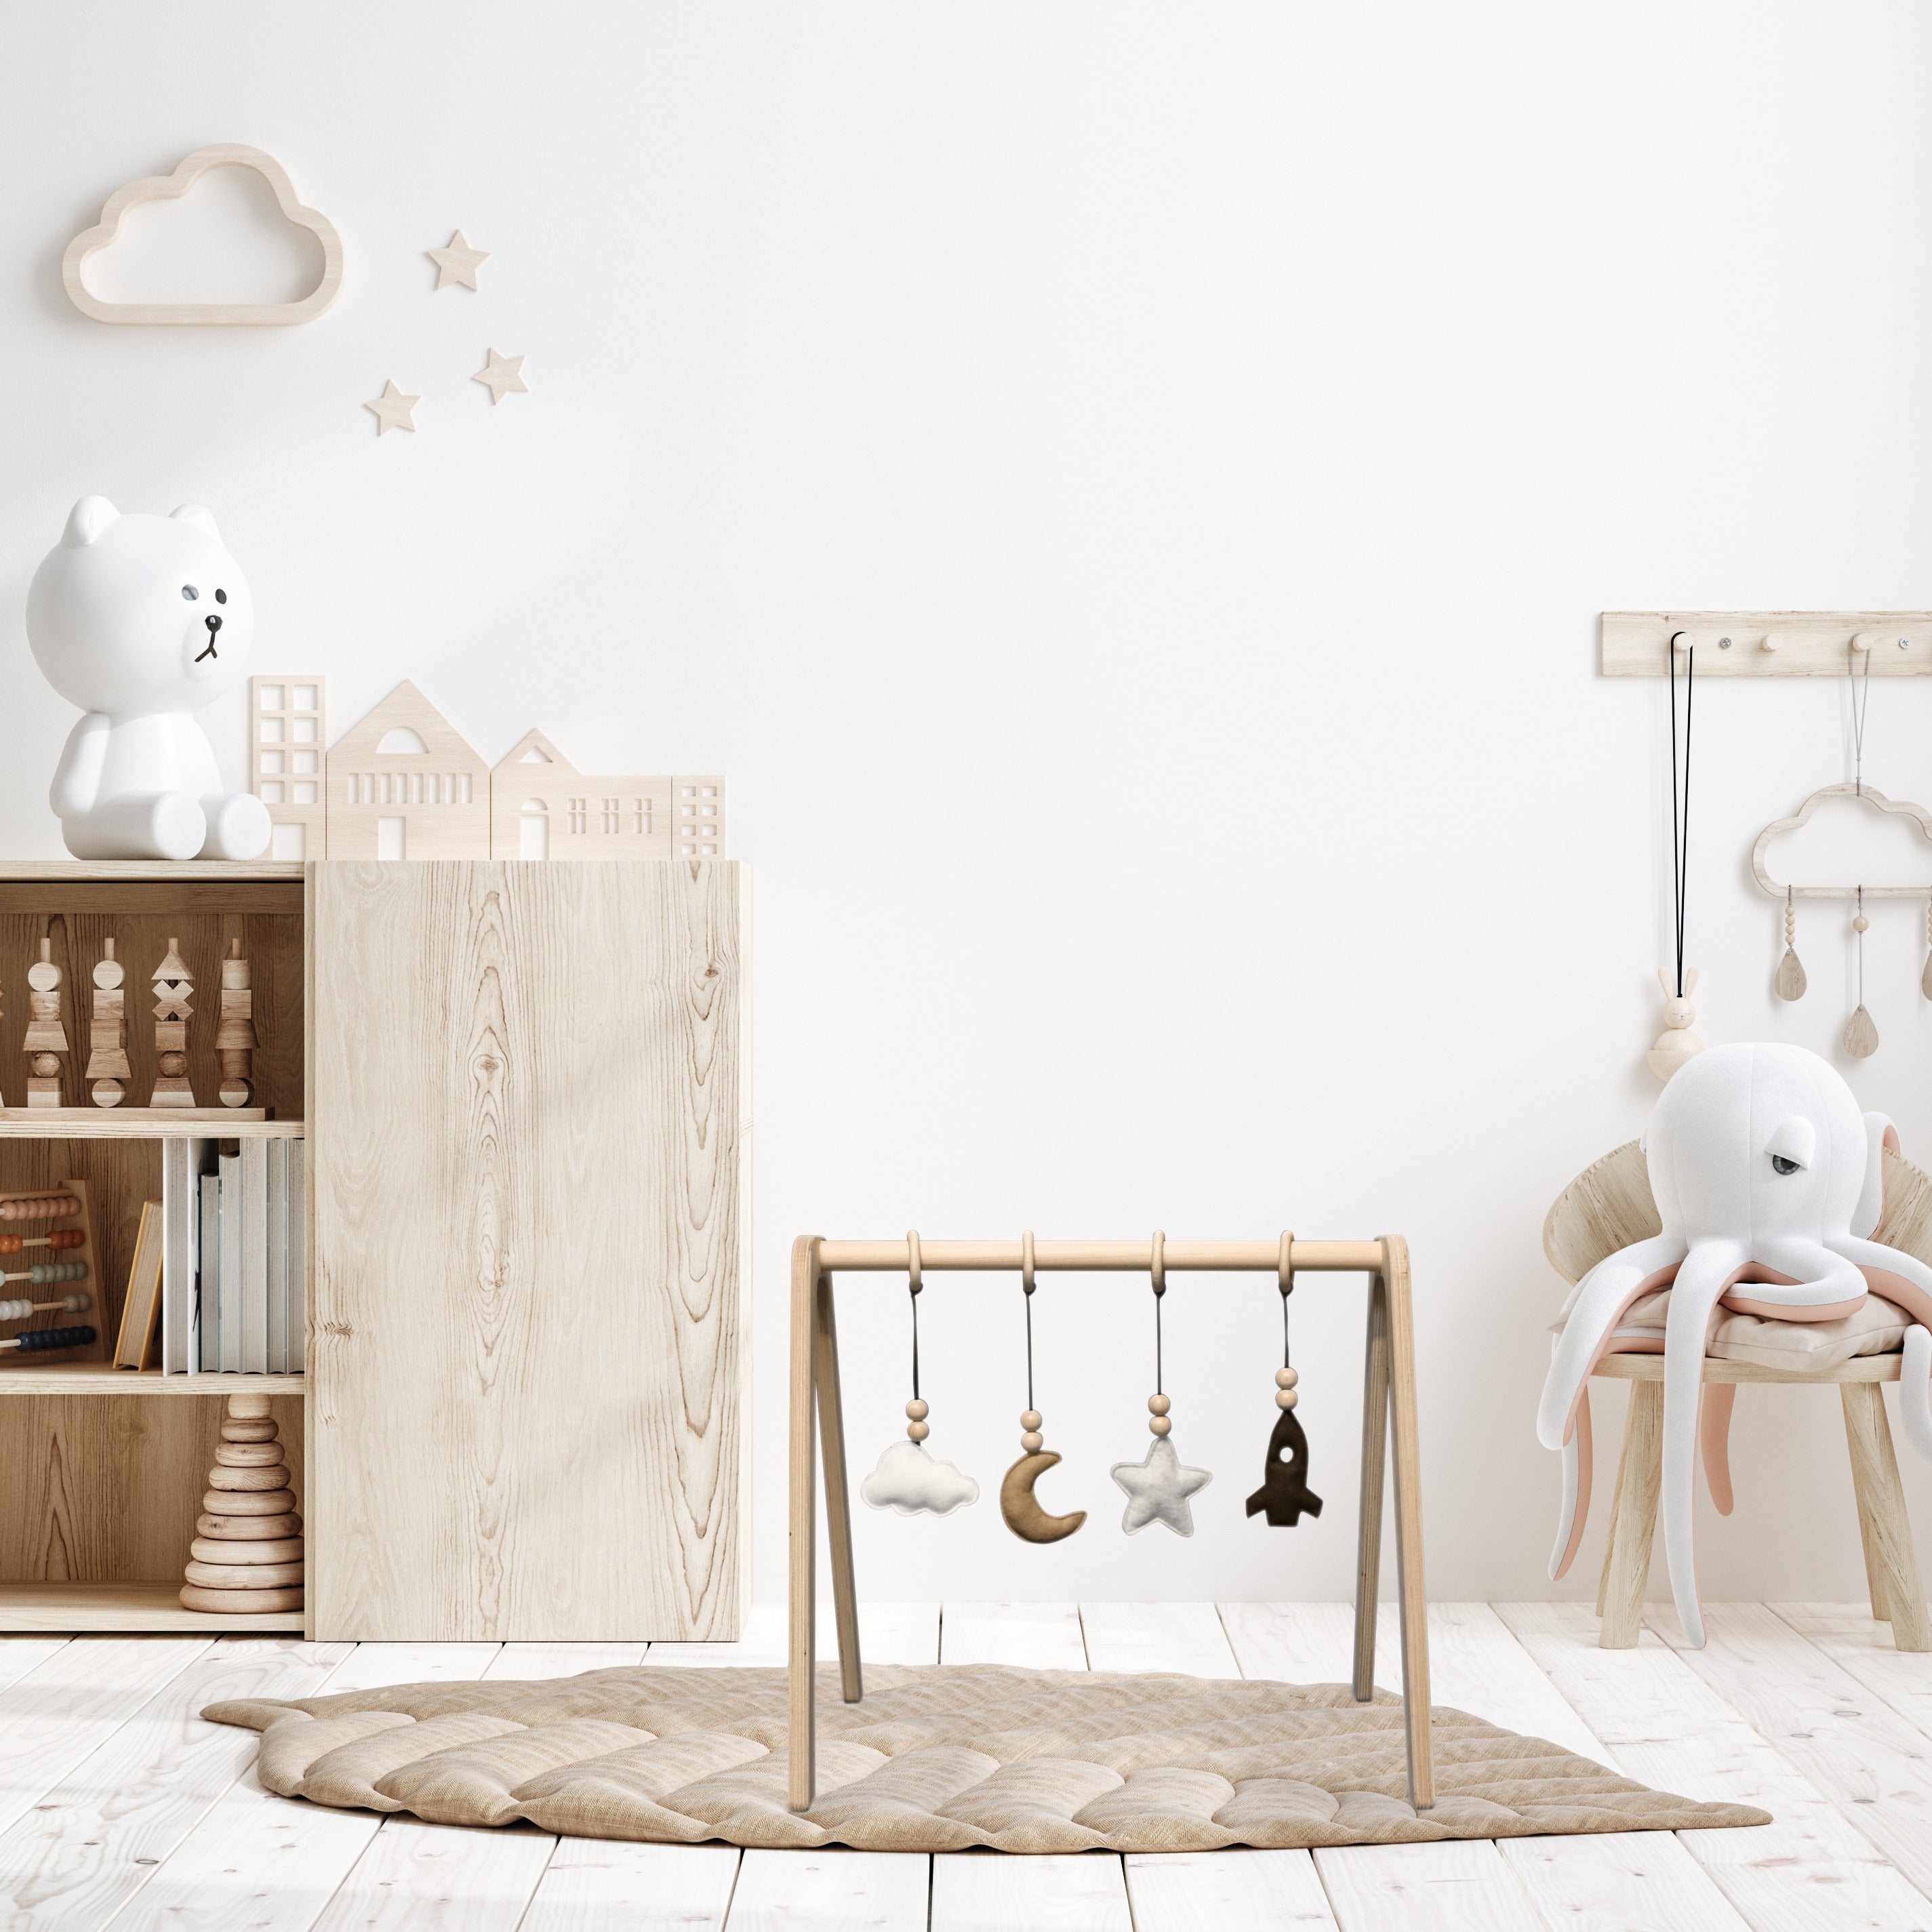 Wooden baby gym, with space hangers - toddie.com